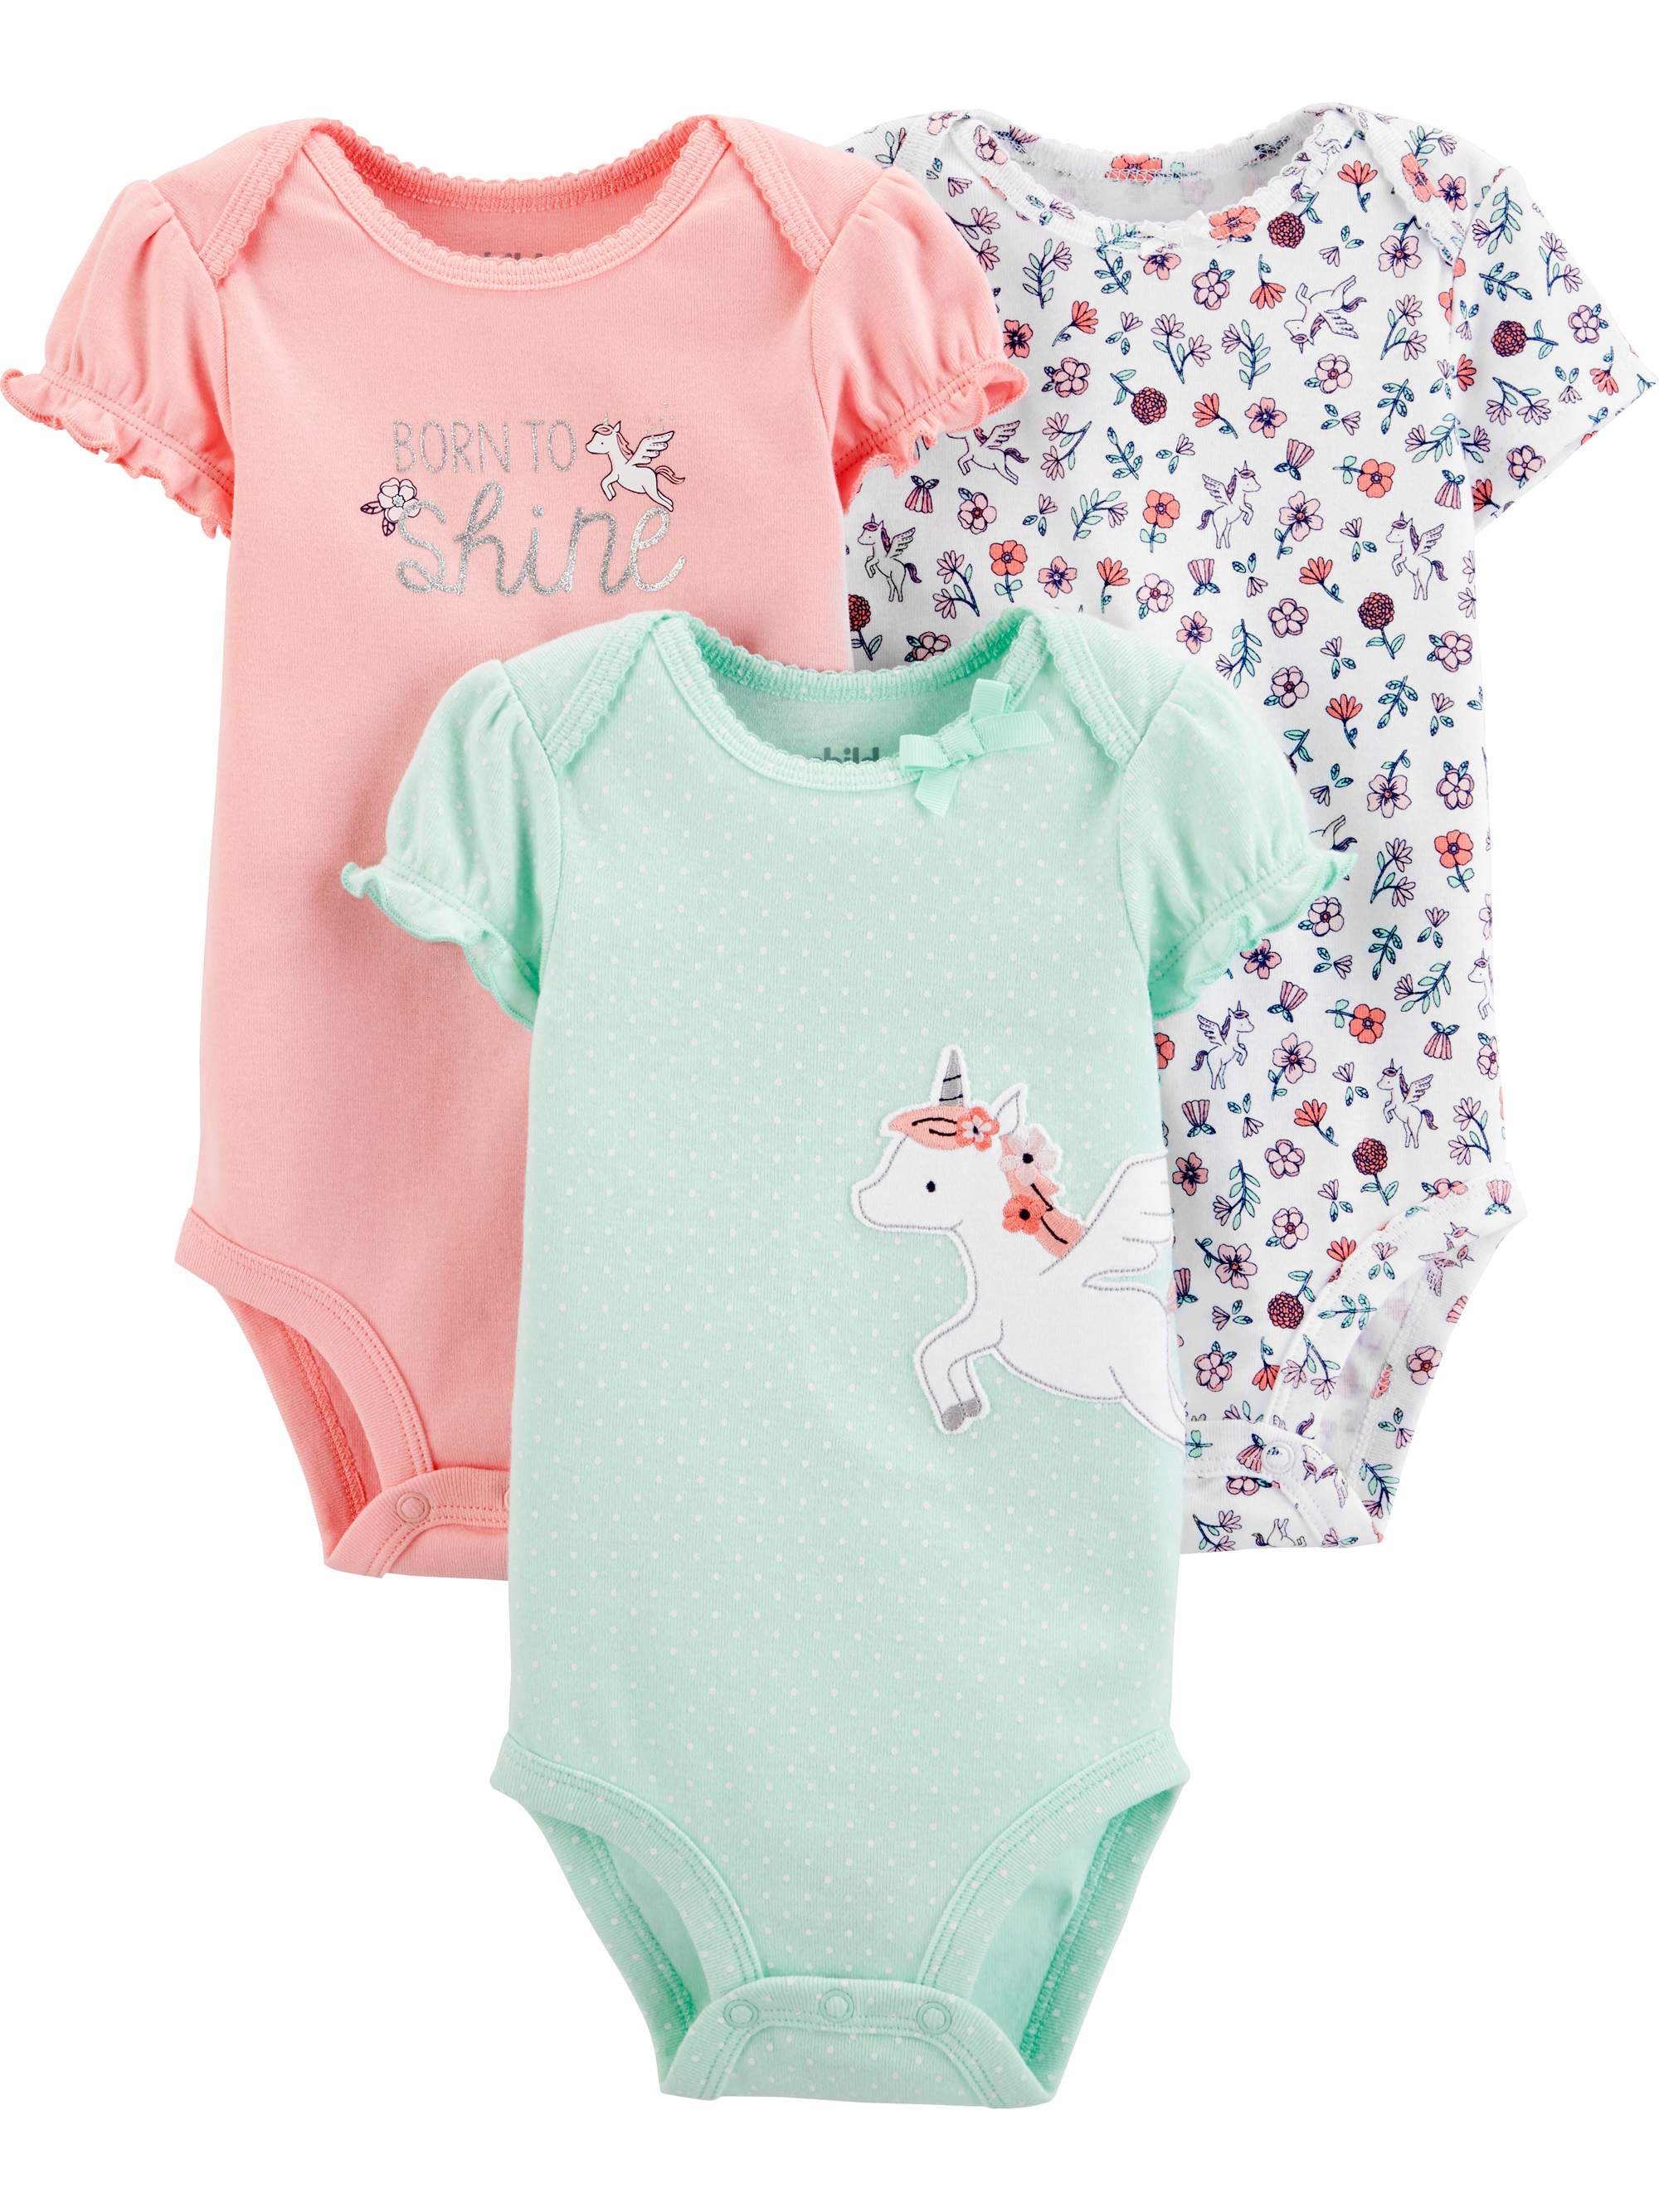 Carter's Child of Mine Baby Girls Short Sleeve Bodysuits, 3-Pack, Preemie-18 Months - image 1 of 4